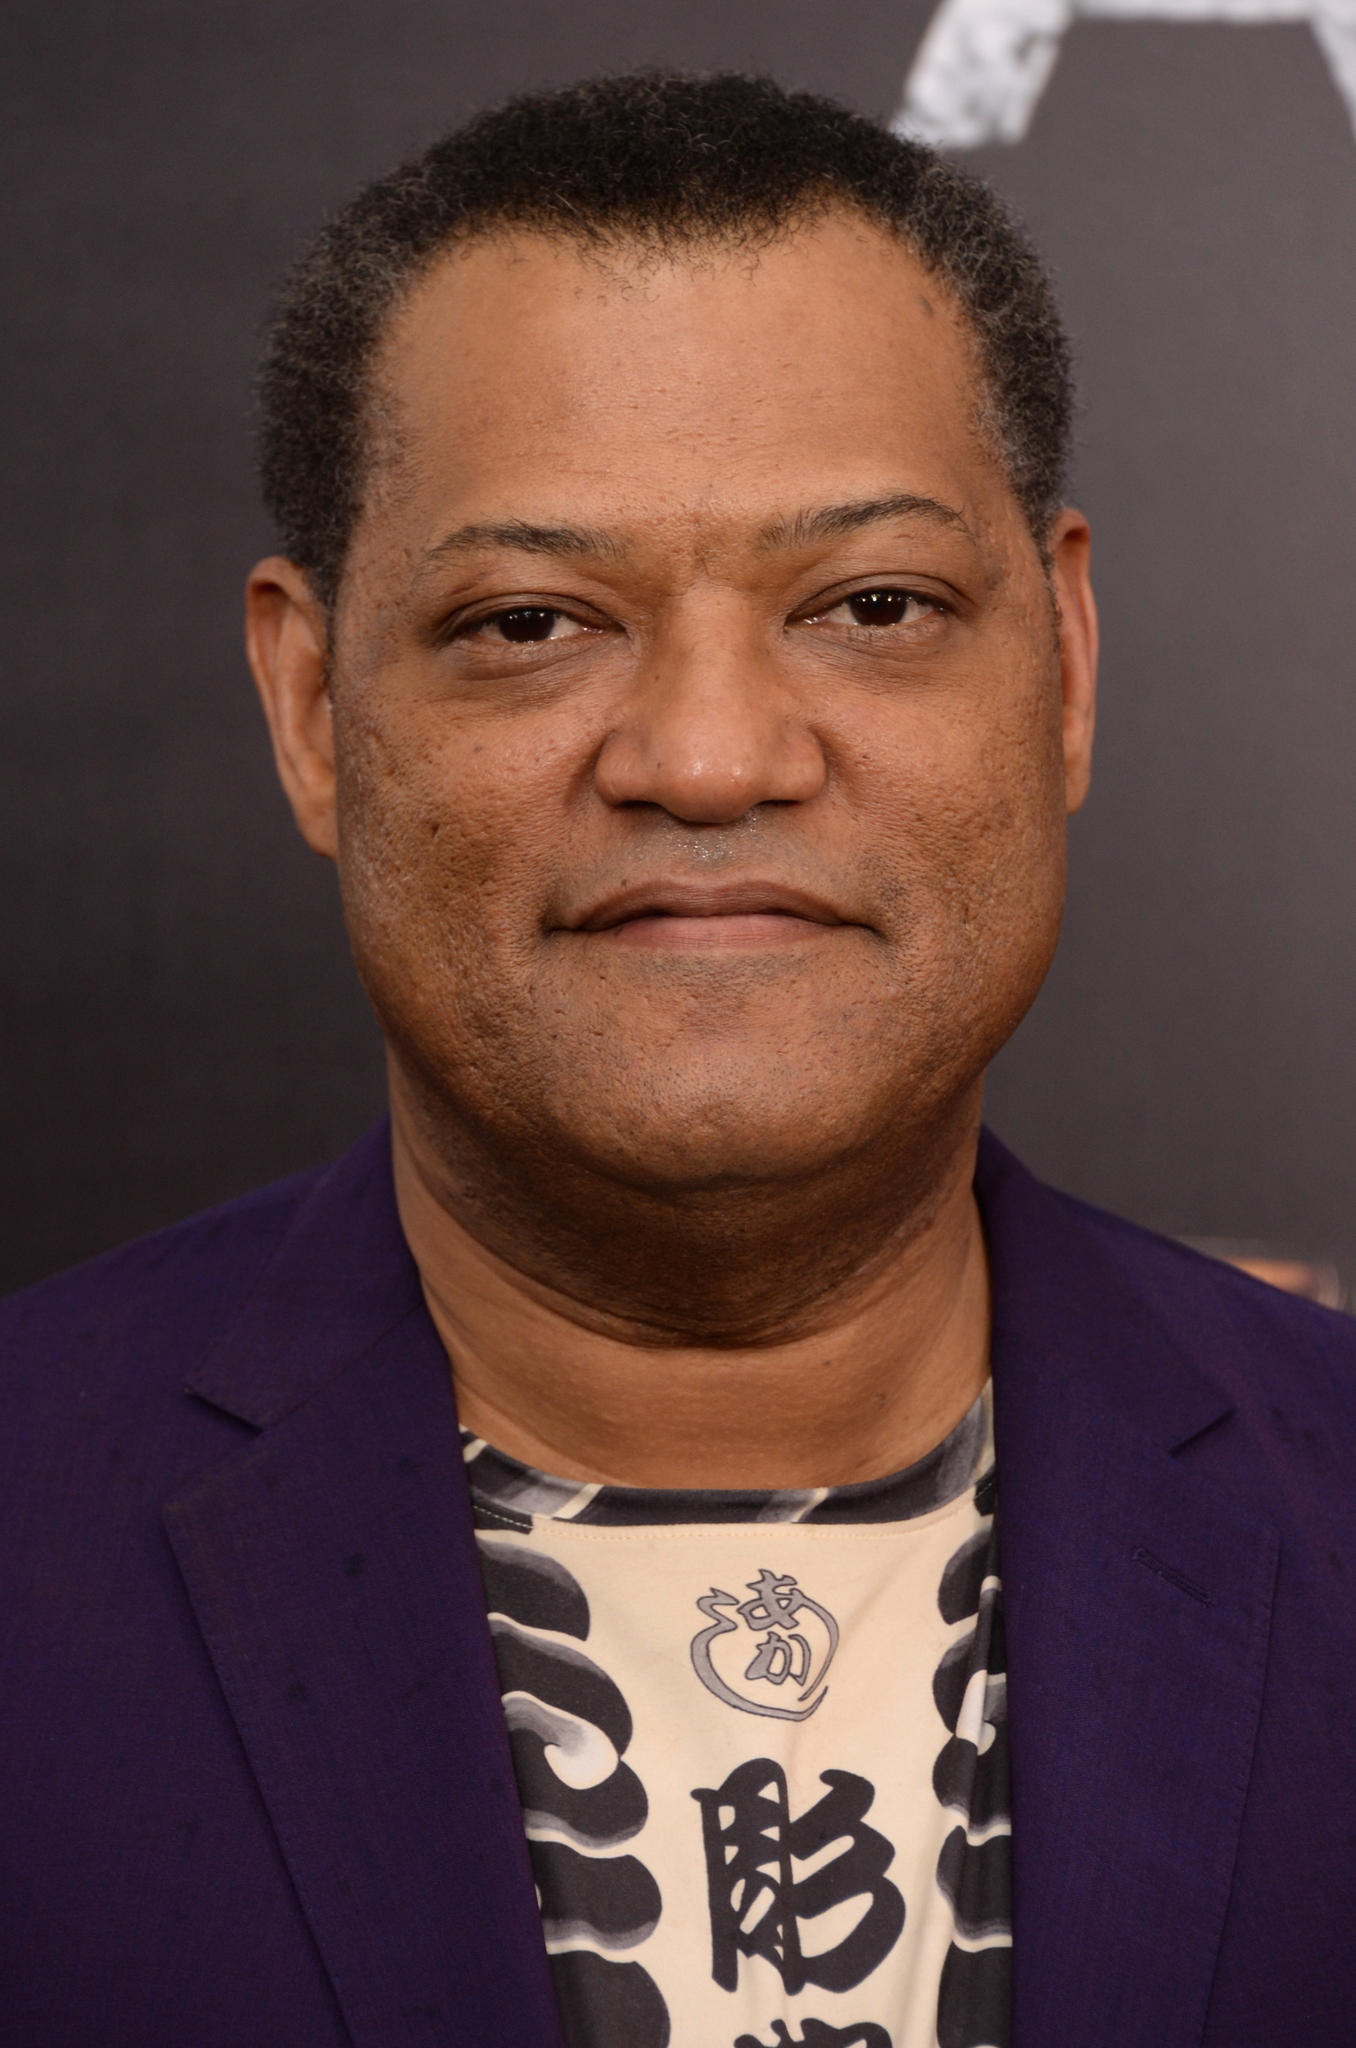 Laurence Fishburne at event of Zmogus is plieno (2013)